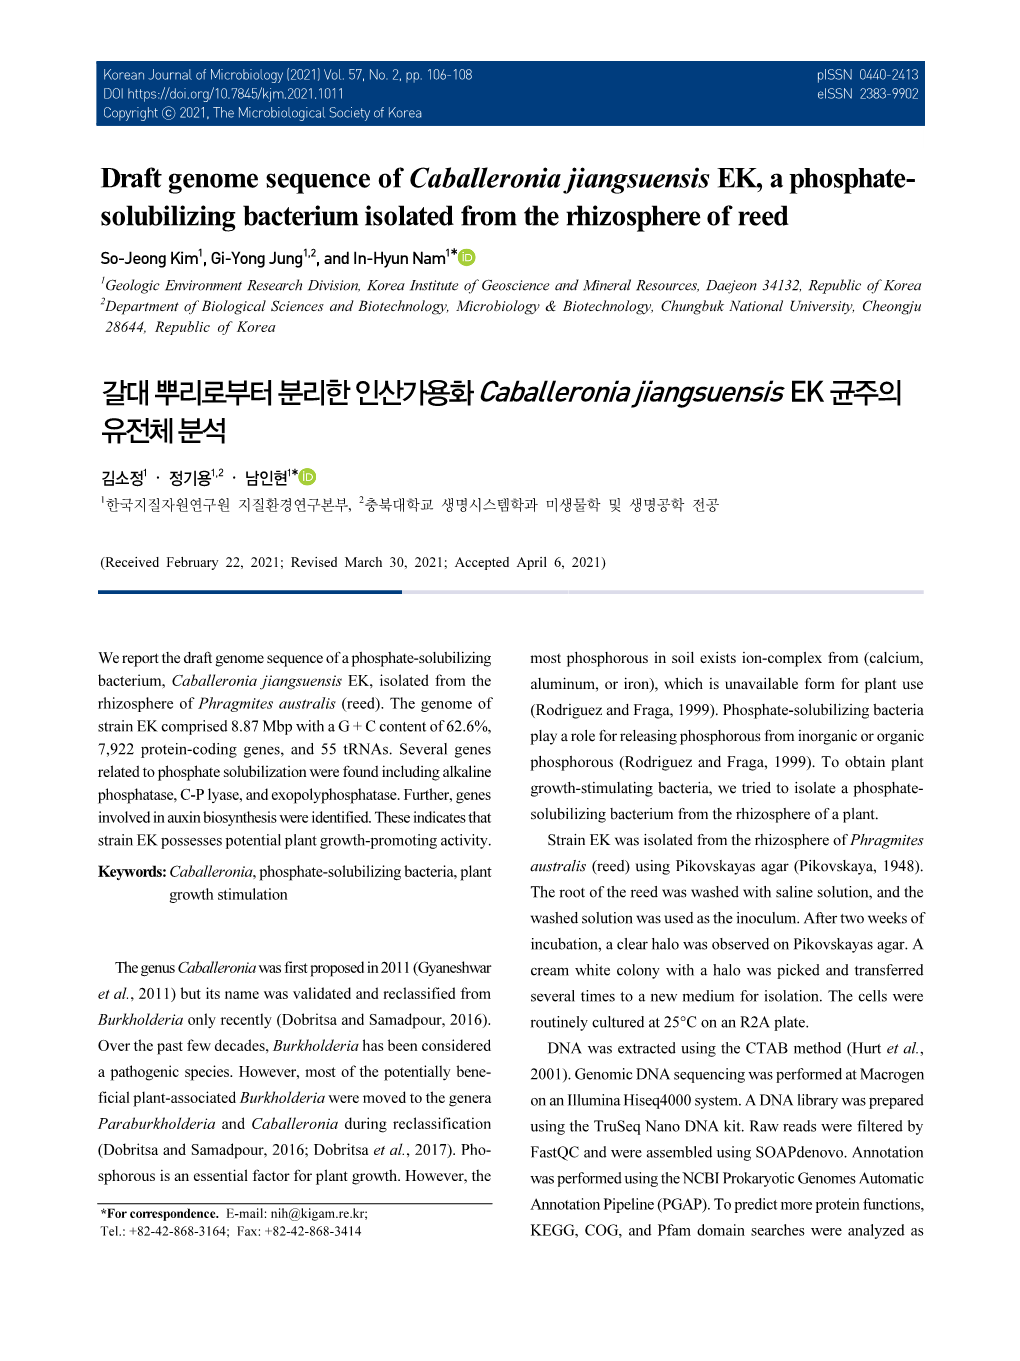 Draft Genome Sequence of Caballeronia Jiangsuensis EK, a Phosphate- Solubilizing Bacterium Isolated from the Rhizosphere of Reed